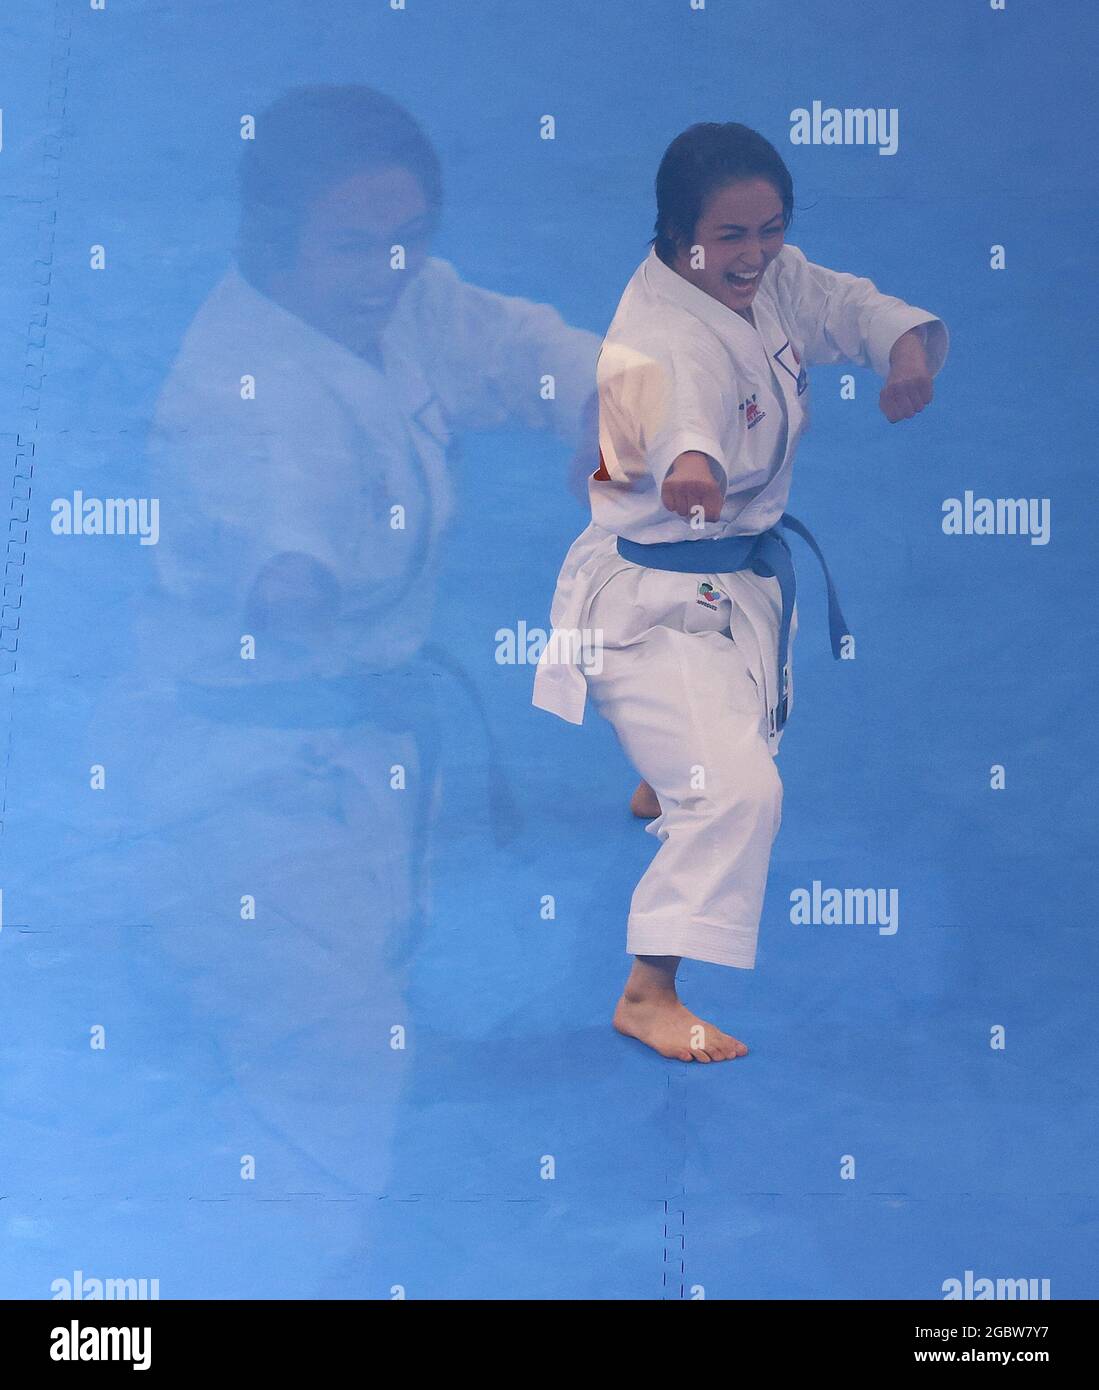 Dongjing, Japan. 5th Aug, 2021. Shimizu Kiyou of Japan competes during the women's kata ranking round of karate at Tokyo 2020 Olympic Games in Tokyo, Japan, Aug 5, 2021. Credit: Cao Can/Xinhua/Alamy Live News Stock Photo